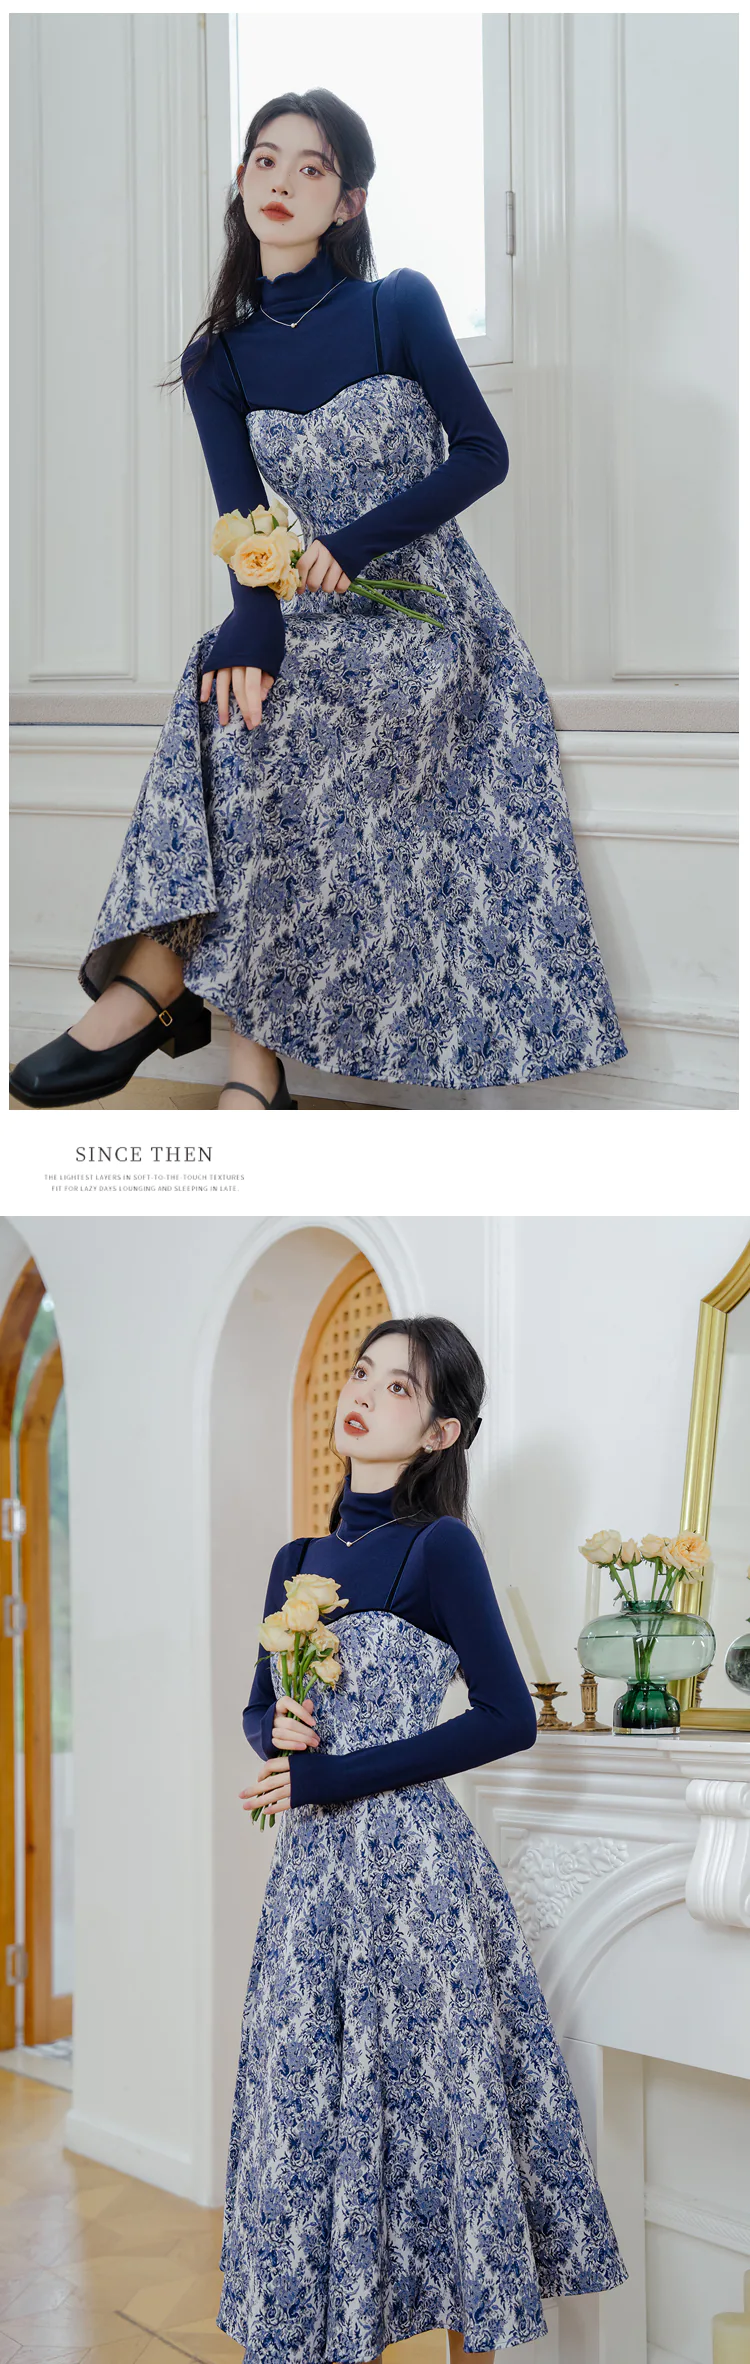 Sweet-Blue-Turtleneck-Knit-Sweater-with-Thick-Floral-Slip-Dress-Suit17